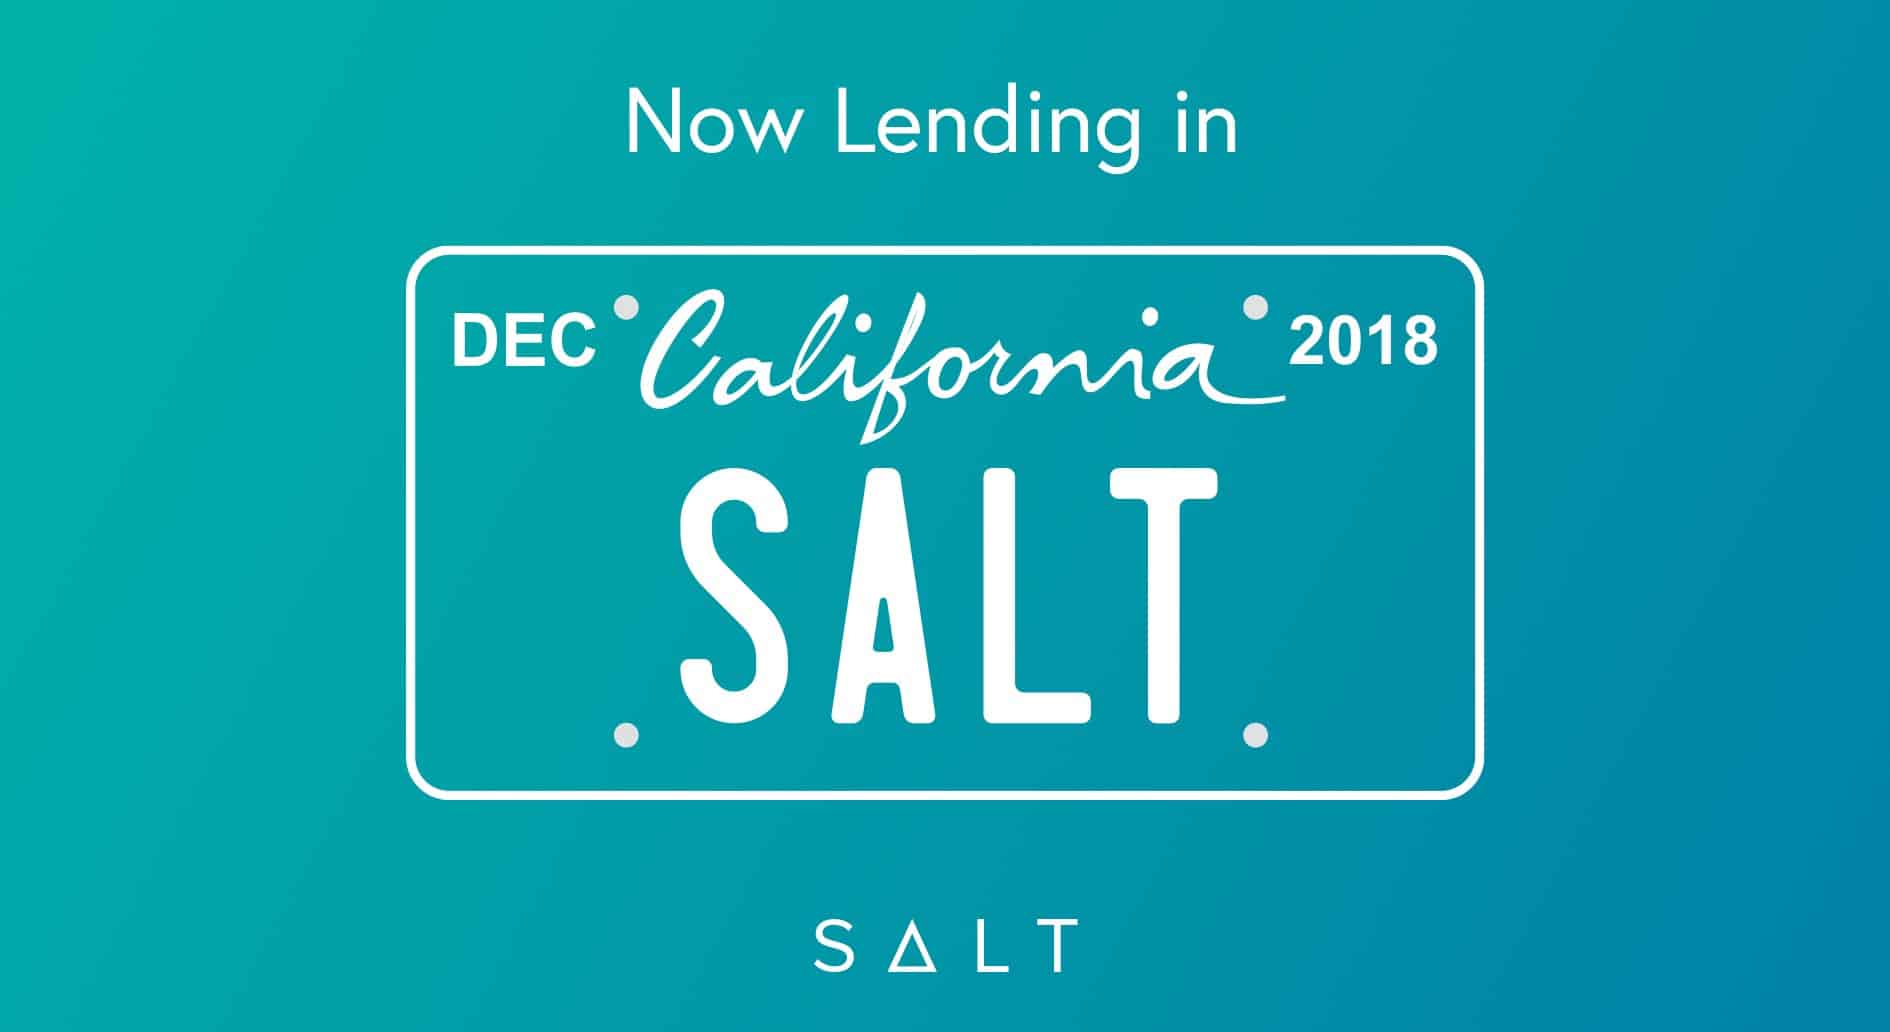 License plate from California where SALT loans are now available